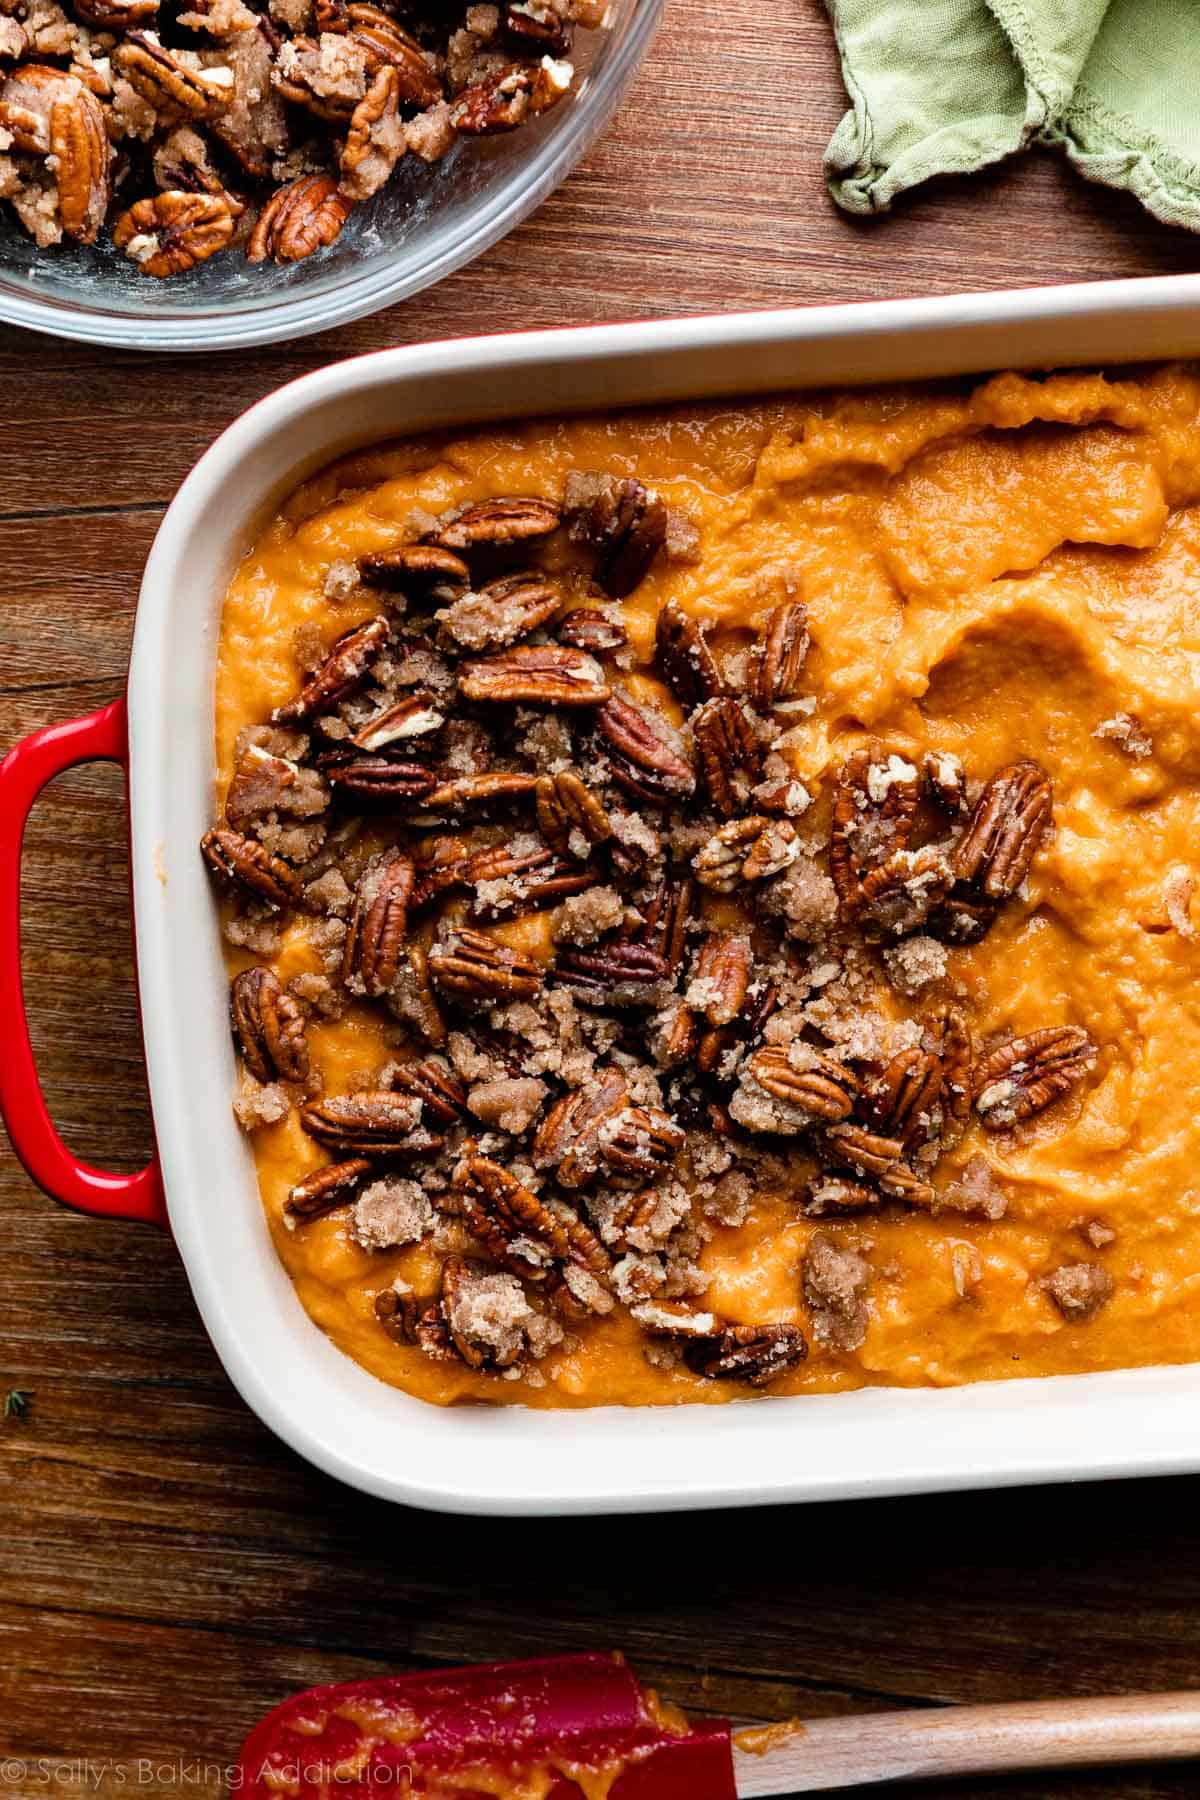 pecan crumble arranged on a portion of sweet potato blender puree.